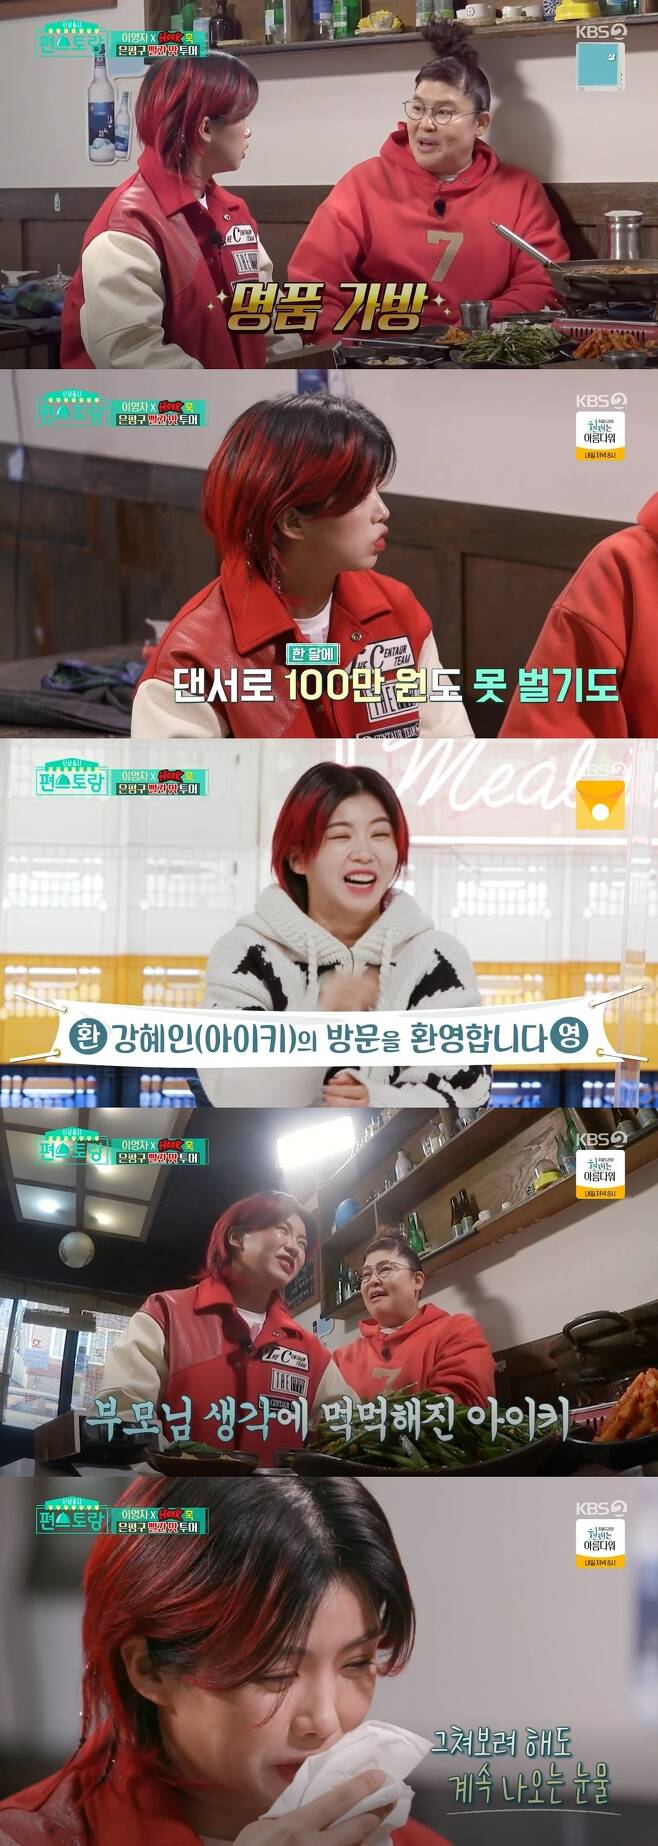 Dancer Aiki boasted a changed status after becoming a popular player.On KBS 2TV Stars Top Recipe at Fun-Staurant broadcast on April 8, Lee Young-ja, a mother of food, was shown heading to Aiki, Hook (HOOK) members and a regular restaurant in Eunpyeong-gu.The restaurant was a store where Hook member Odd had Alba since childhood.I had to do two jobs until six months ago, and there were a lot of dancers who could not earn a million won a month, Aiki said.I had little income as a dancer; I dont have to do Alba anymore, Hook member Yevon said, while Ision added, Ill give you a dime.Aiki said, Now the members buy it. He expressed his pride in the members who make money as dancers.My parents walked to The Closet in my home. I went to my home in a year, and there was a Welcome to Kang Hye-ins (Aiki) visit on the Claset.Her daughter went home, and it said visit. She was embarrassed and whatever it was and I was so grateful for it.I was grateful for what I did, he said.Lee Young-ja, who heard this, said, My parents tell me to listen to the next person. Did not you call the English?If the guest does not understand well, he says, Did you contact my daughter, Youngja, who is MBC? Friends from the countryside have all these memories. My parents are from Jeolla province, and my grandfather, Grandmas Boy, is alive.When I go down, I go around the neighborhood with my grandfather, Grandmas Boy. Youre proud of your granddaughters daughter.